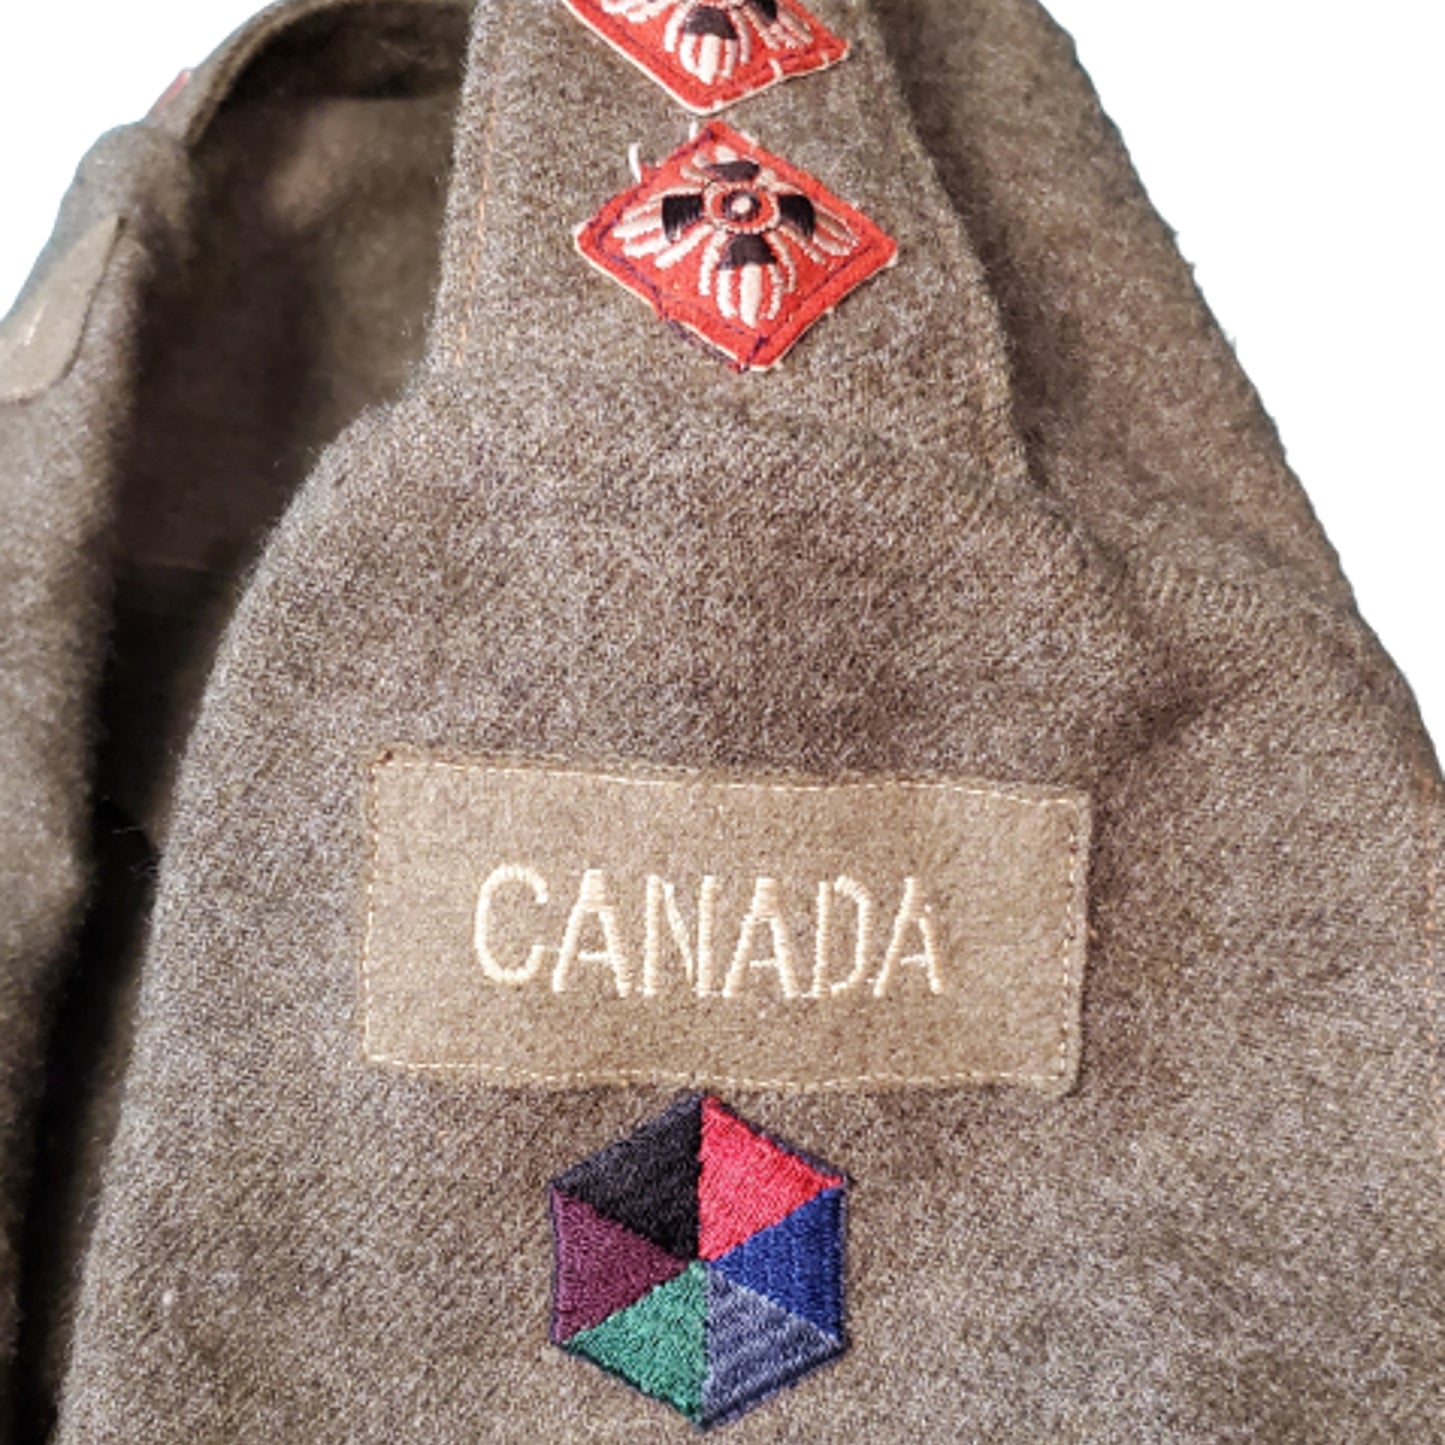 Named WW2 Canadian Pacific Command Officer's Battle Tunic